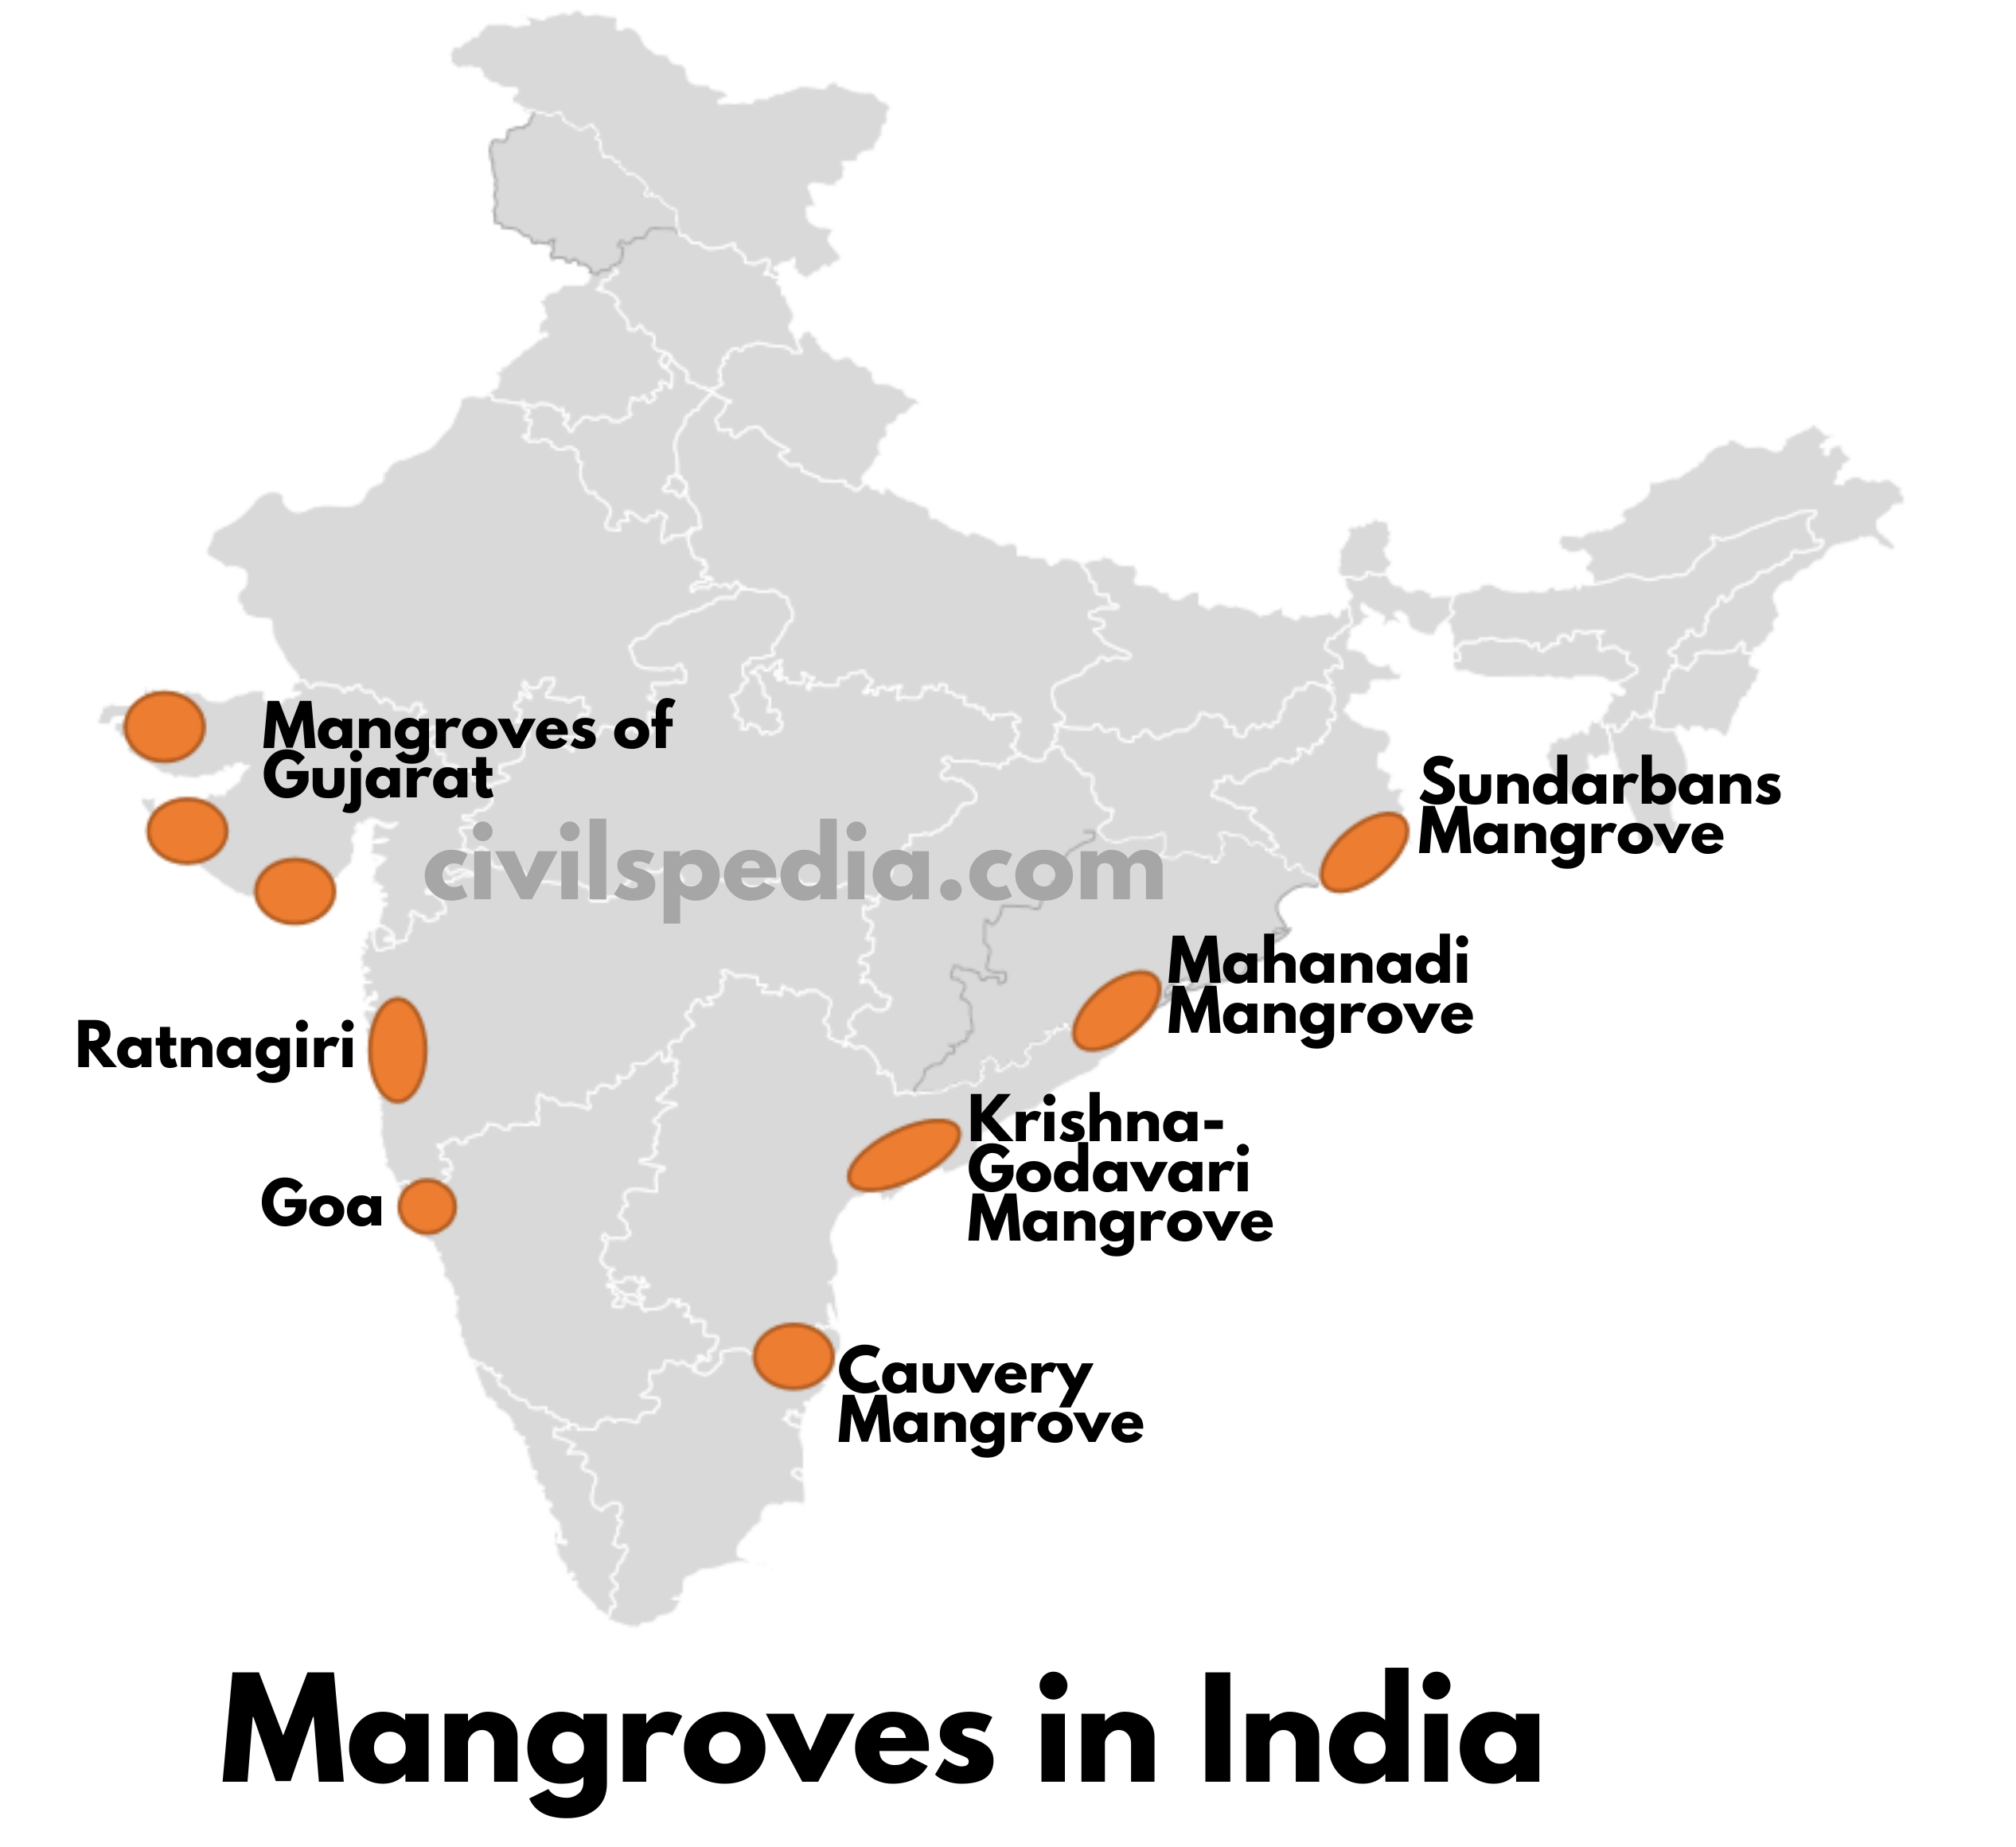 Mangroves in India 